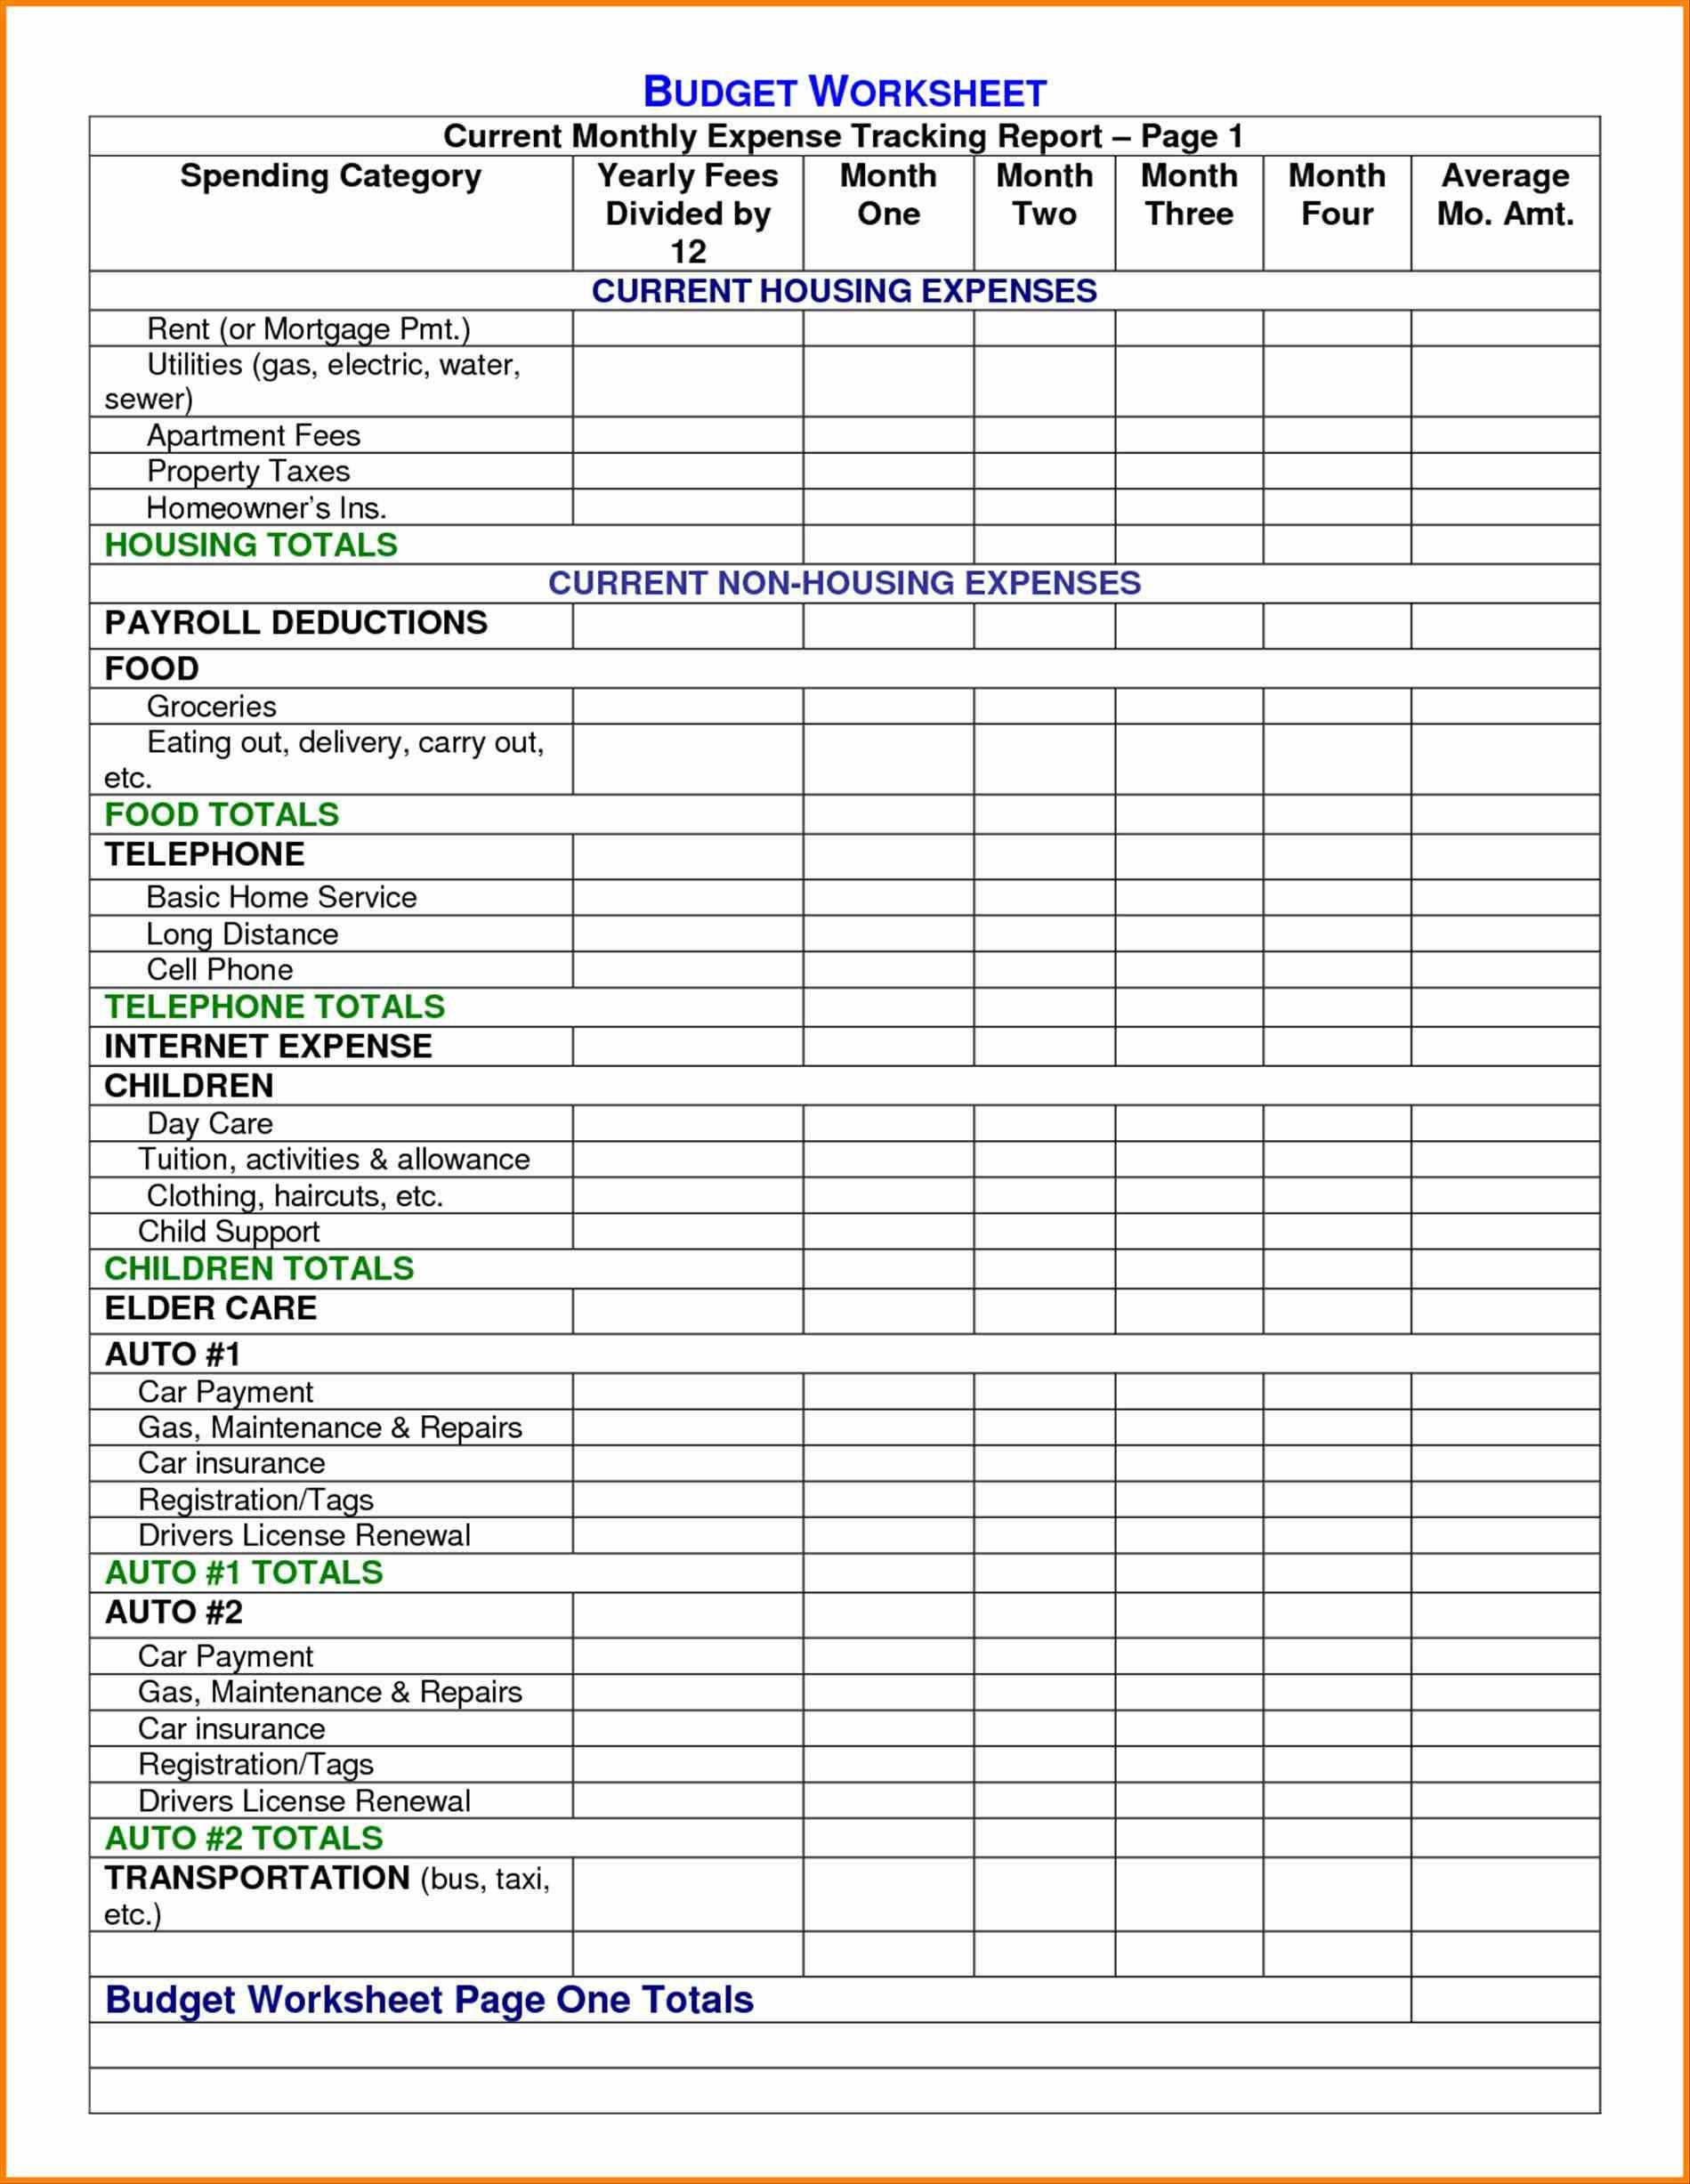 Example Of Budget Excel Template Reddit Intended For Budget Excel Template Reddit In Excel